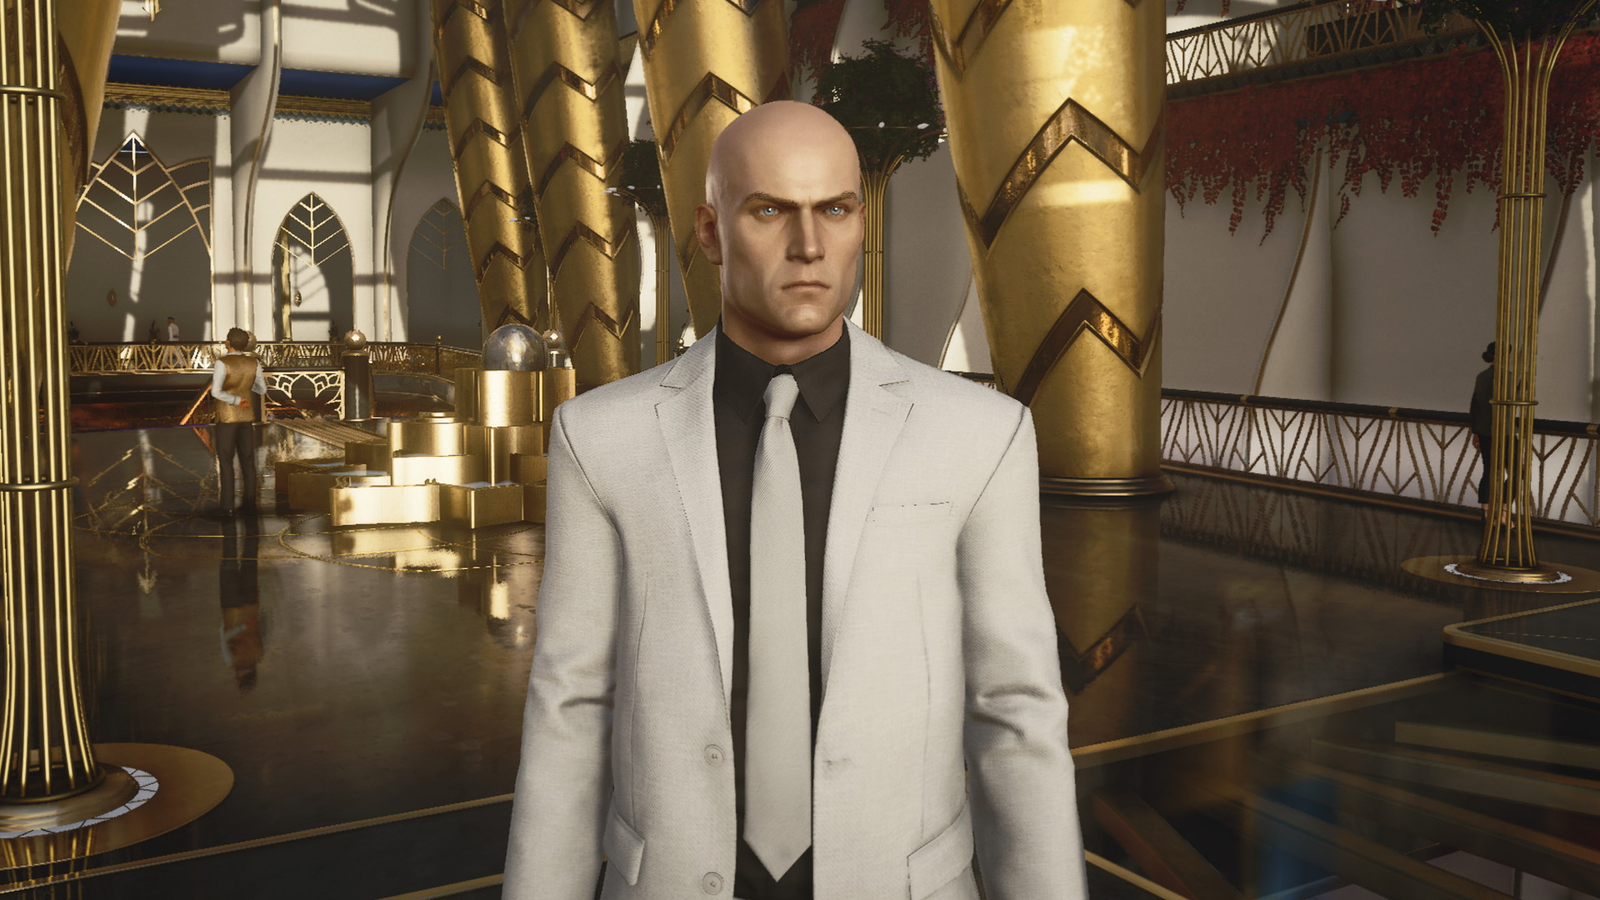 Review: Hitman 3 is the peak of the trilogy